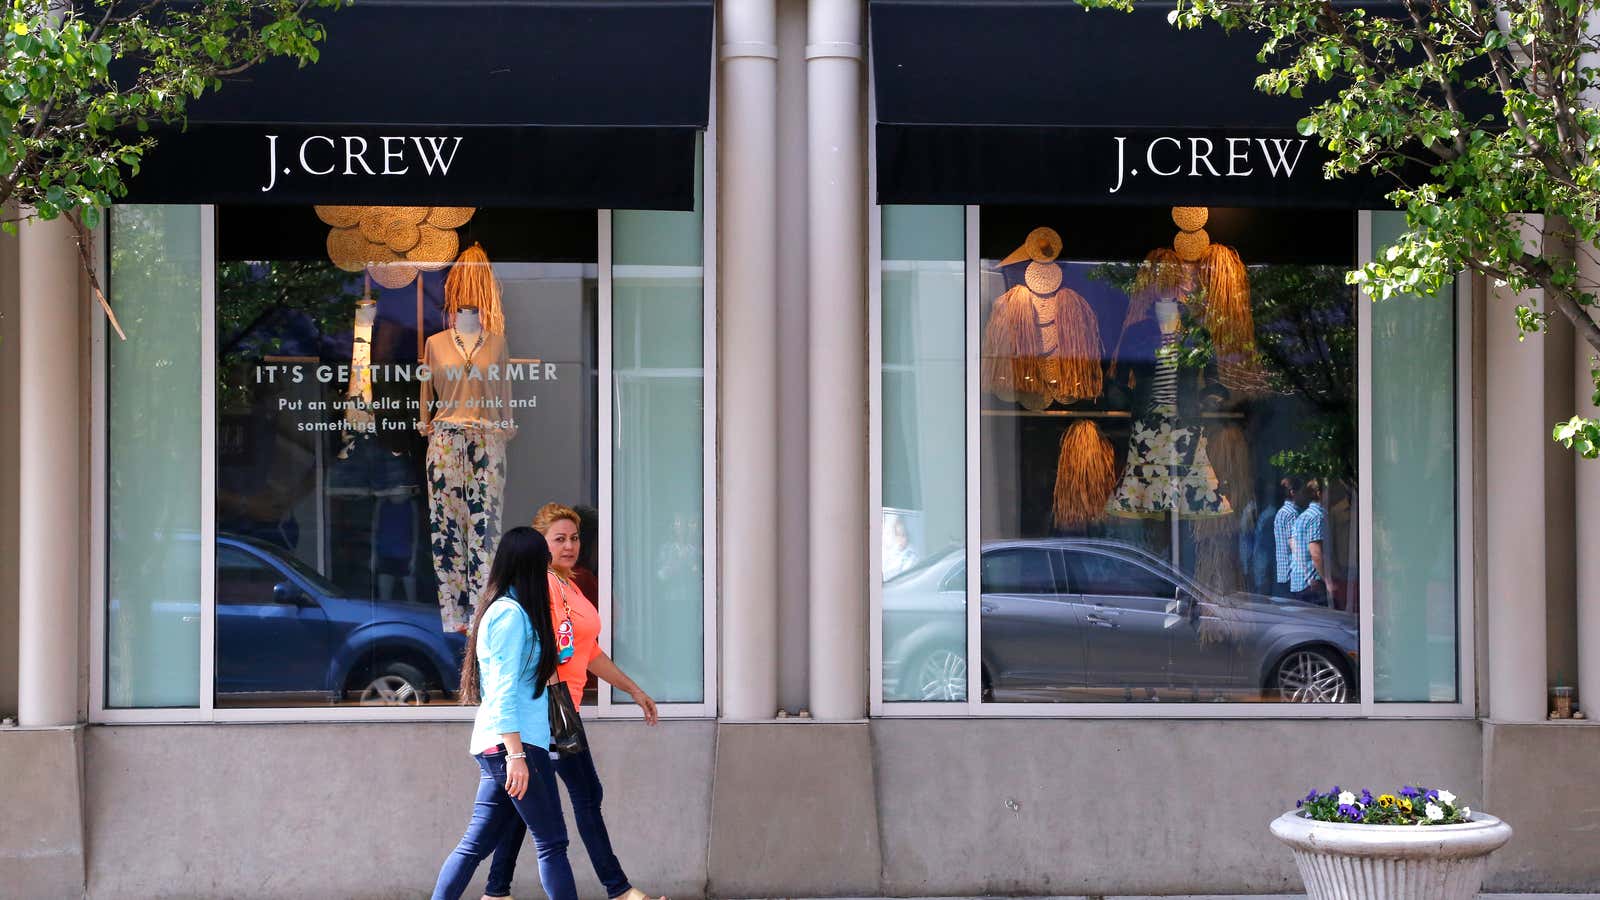 The exit of J. Crew’s CEO shows a brand unable to shake its identity crisis